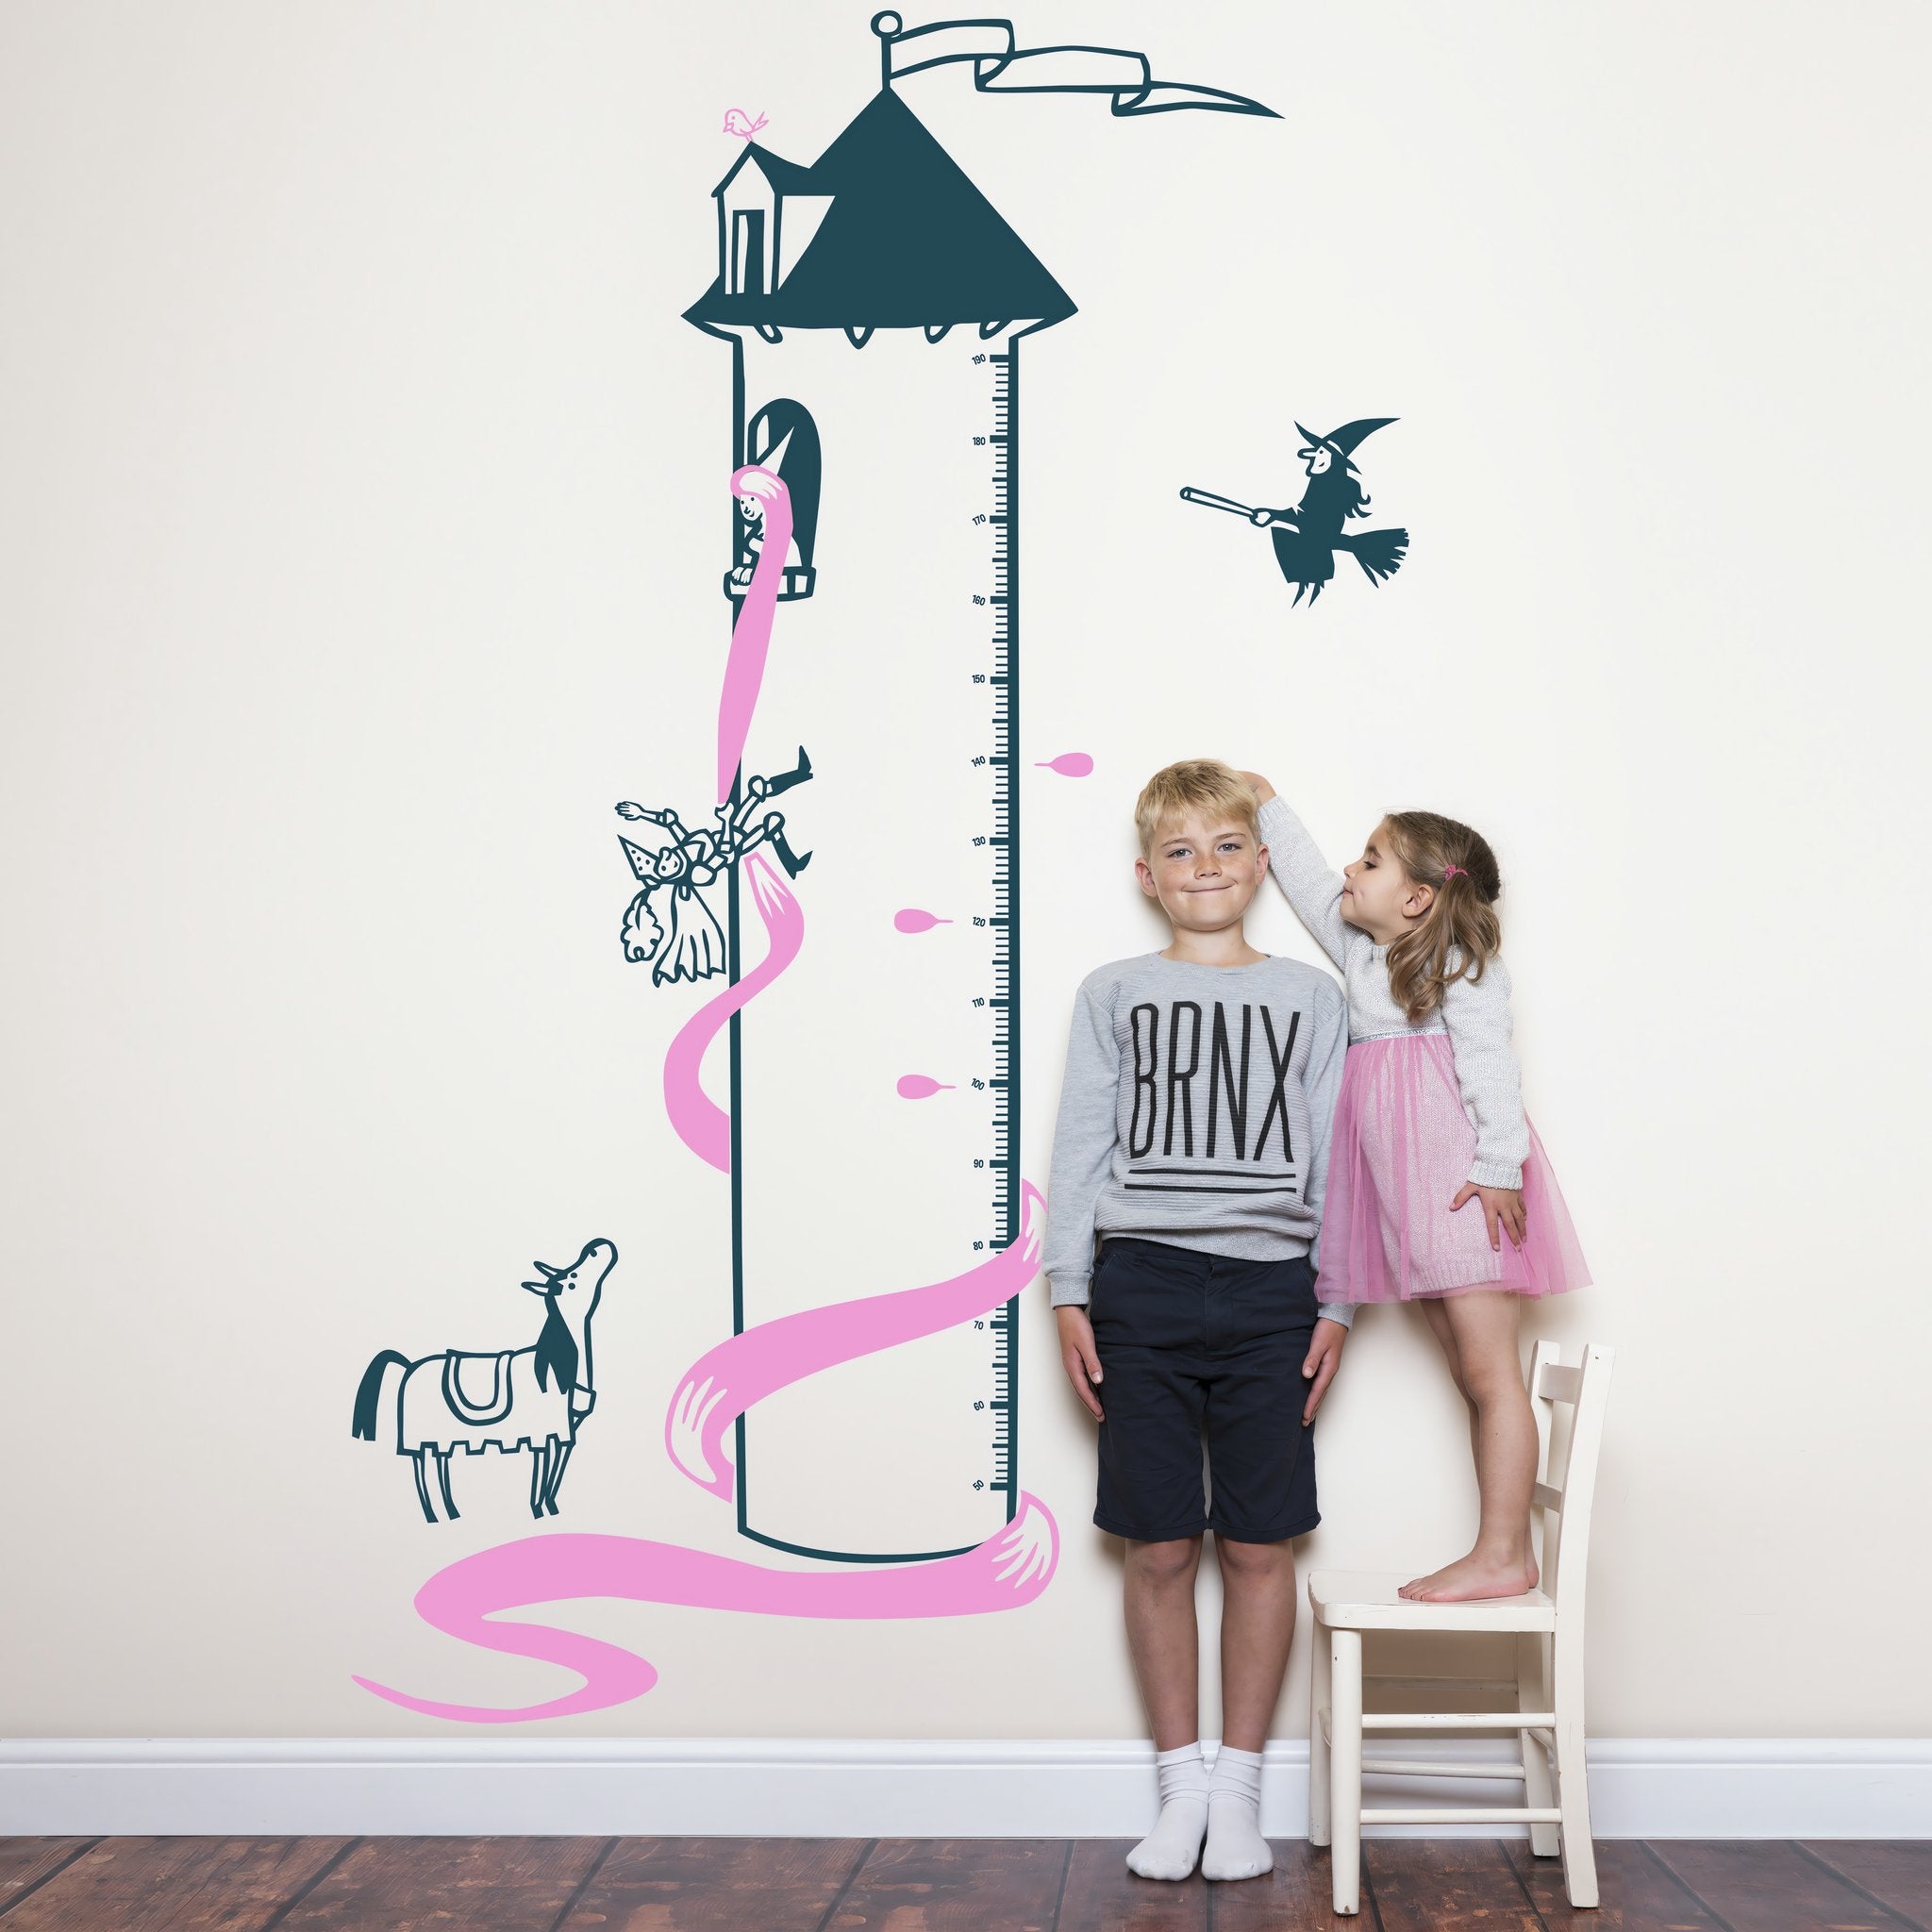 Height chart wall sticker of rupunzel in a tower being rescued py a prince with a young boy and girl nearby.